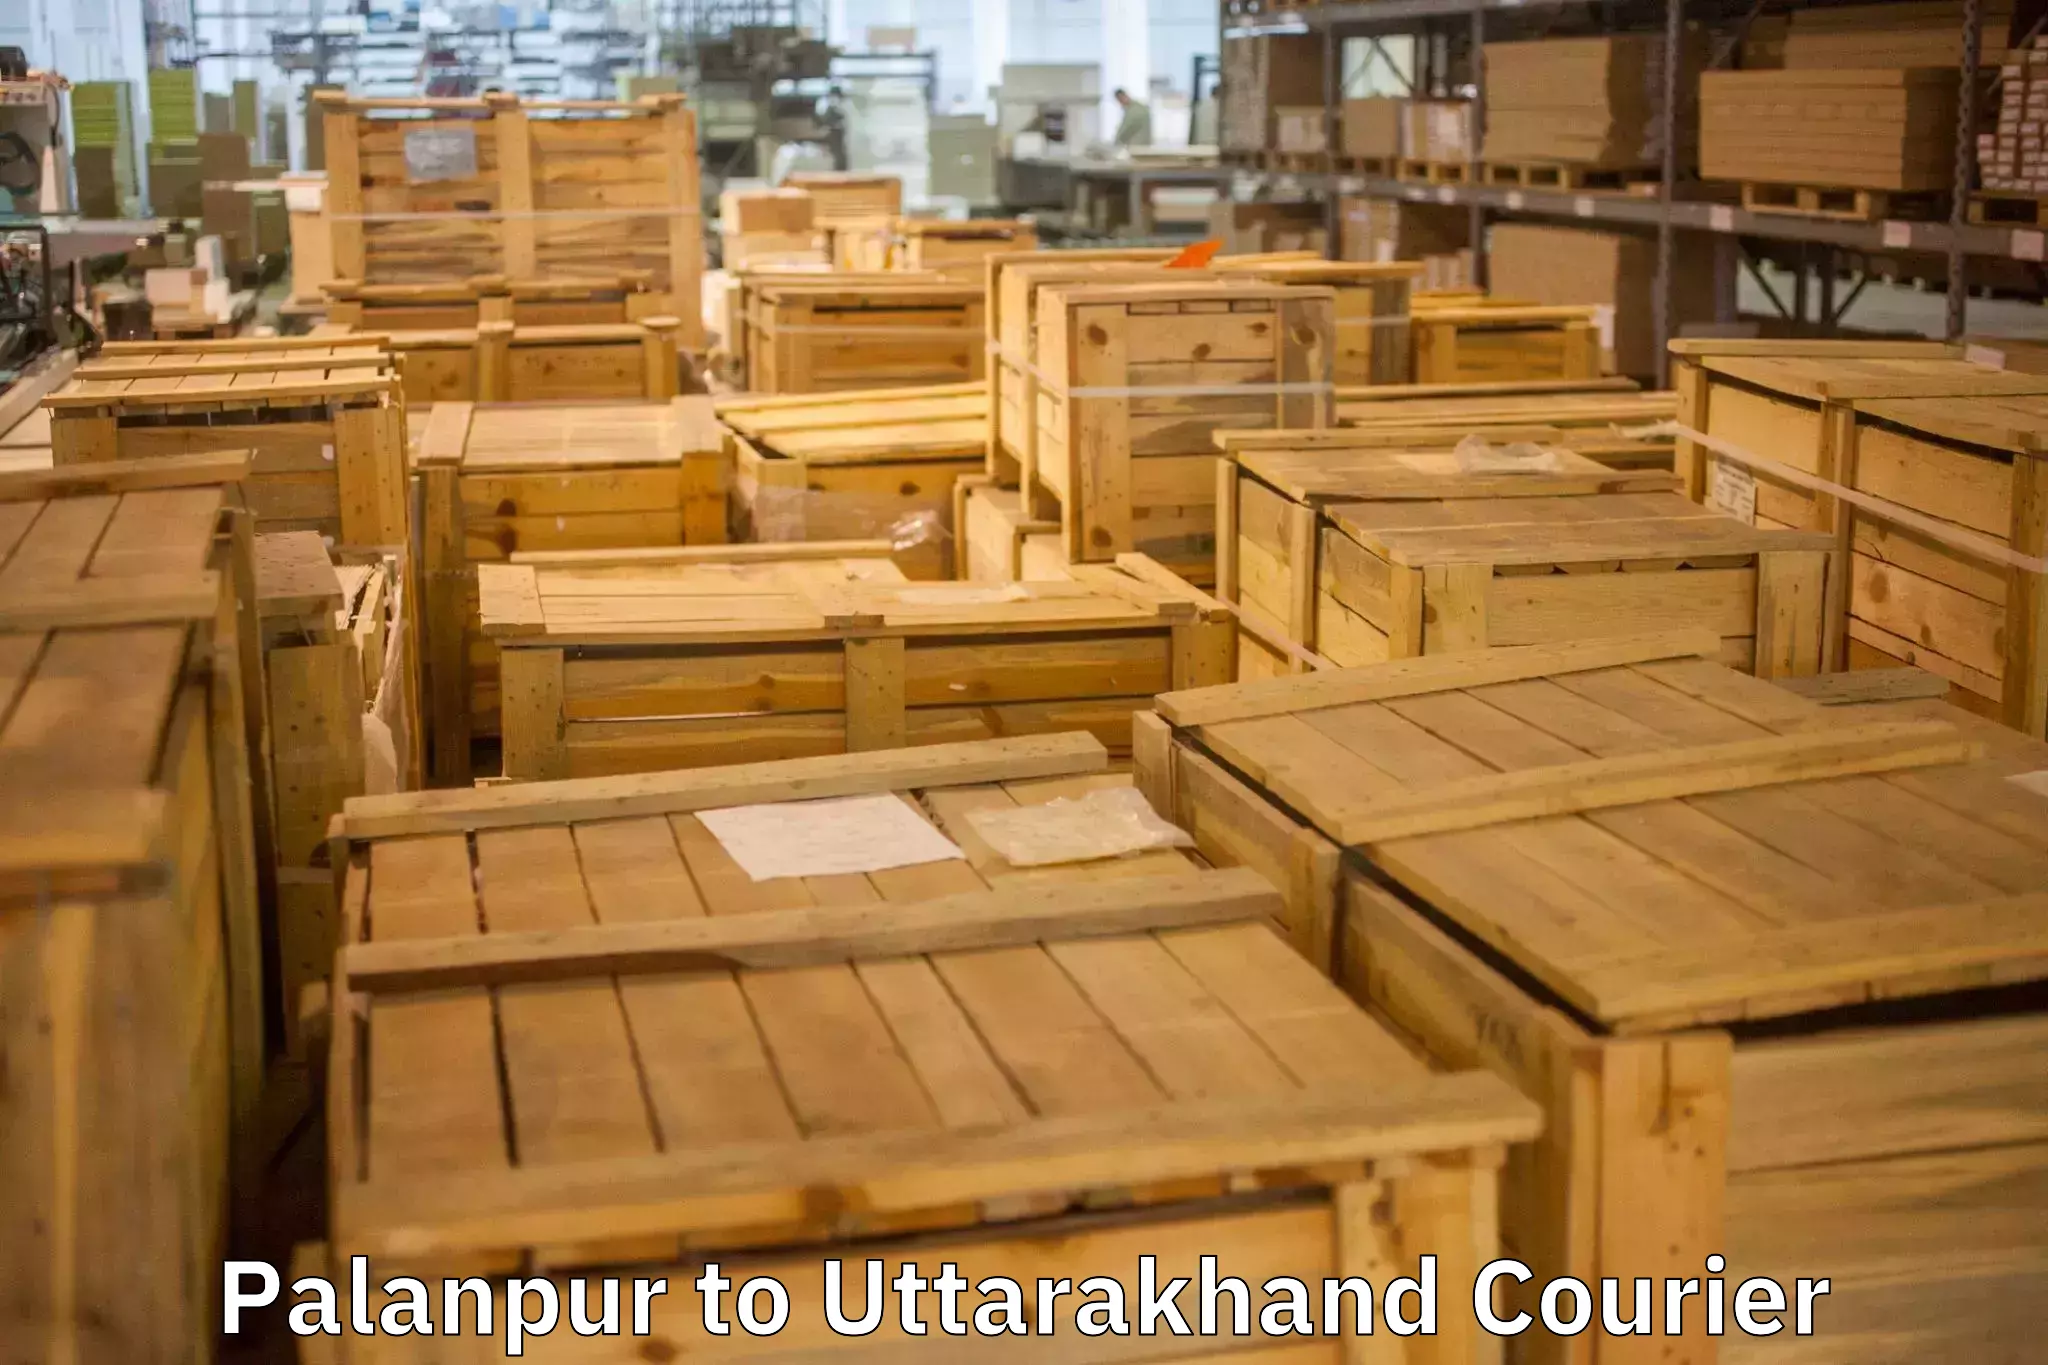 Furniture transport and logistics Palanpur to Rudrapur